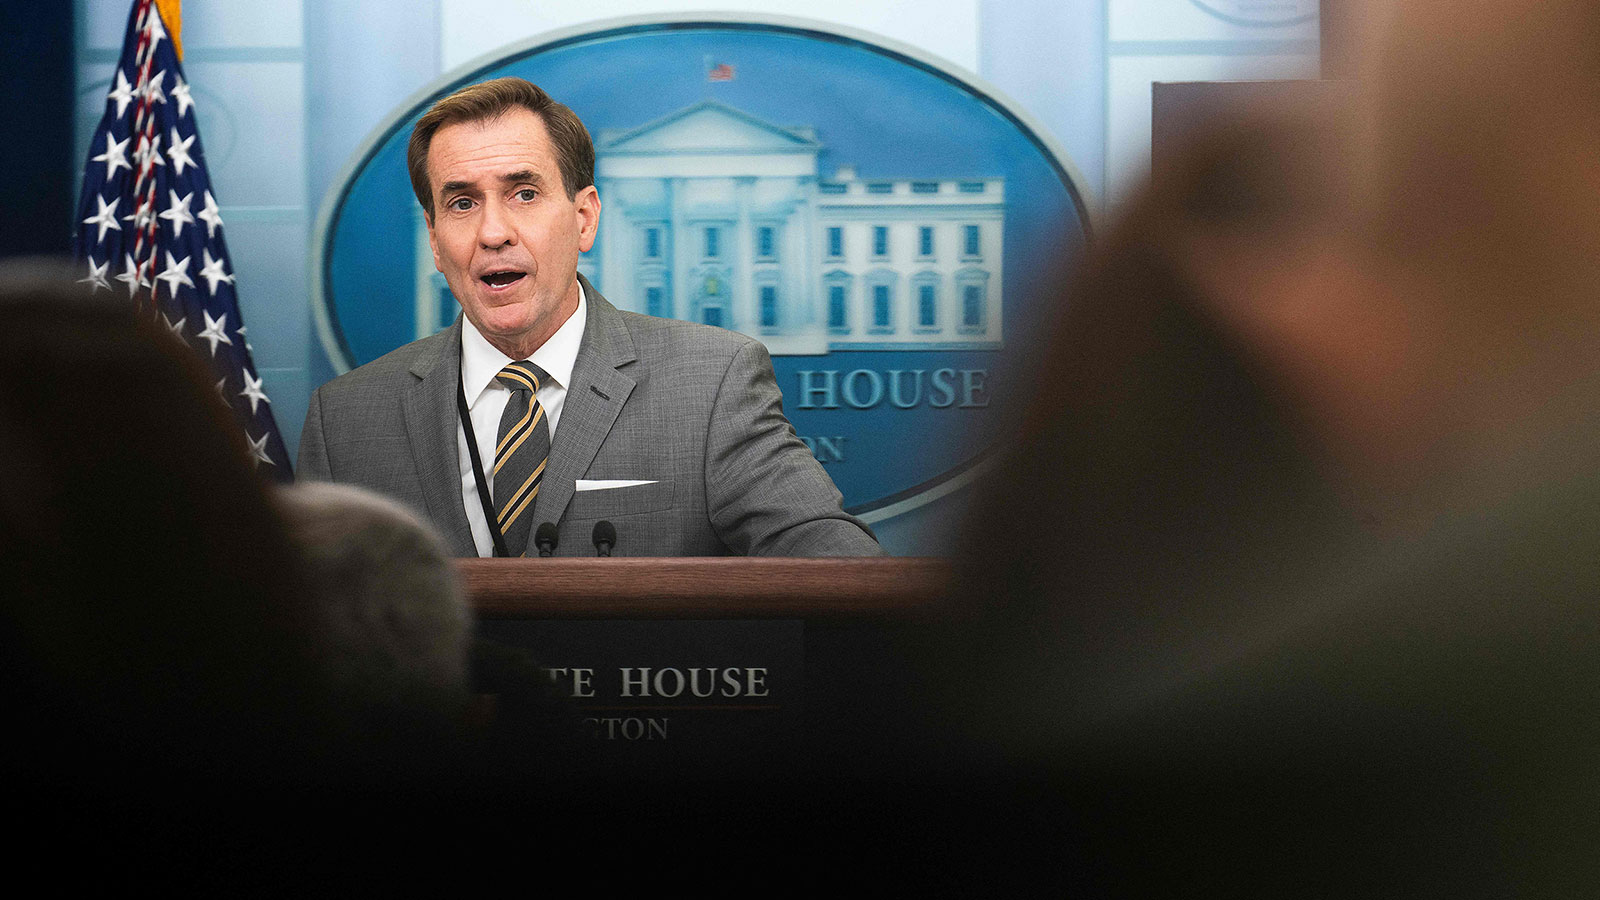 National Security Council Coordinator for Strategic Communications John Kirby speaks during the daily briefing in the James S Brady Press Briefing Room of the White House in Washington, DC, on August 1.